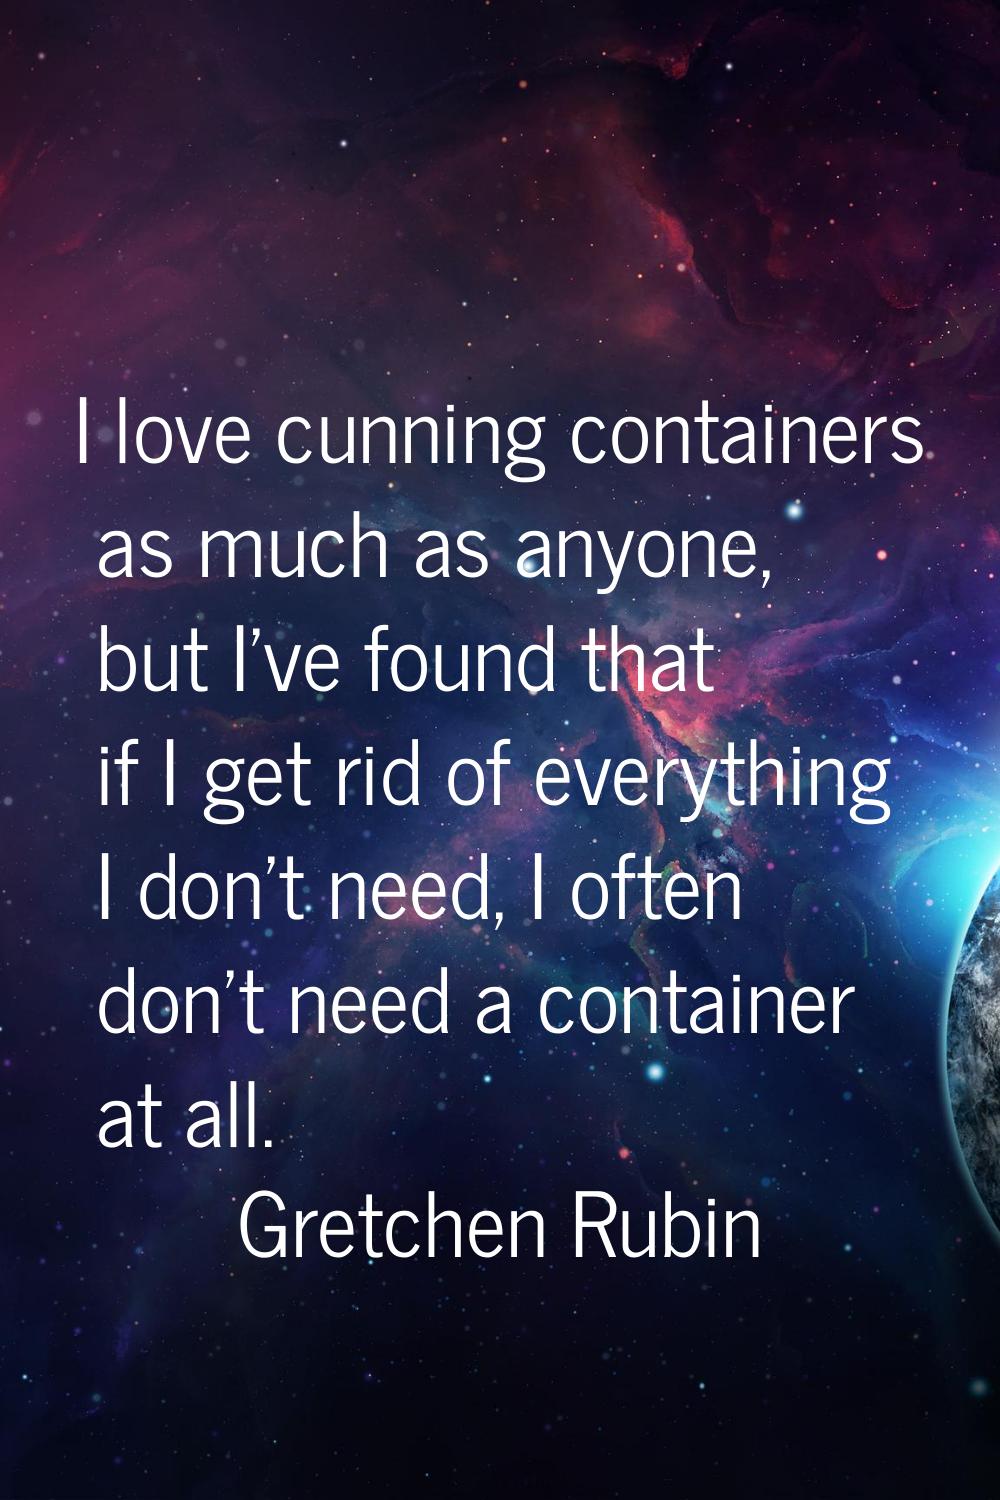 I love cunning containers as much as anyone, but I've found that if I get rid of everything I don't